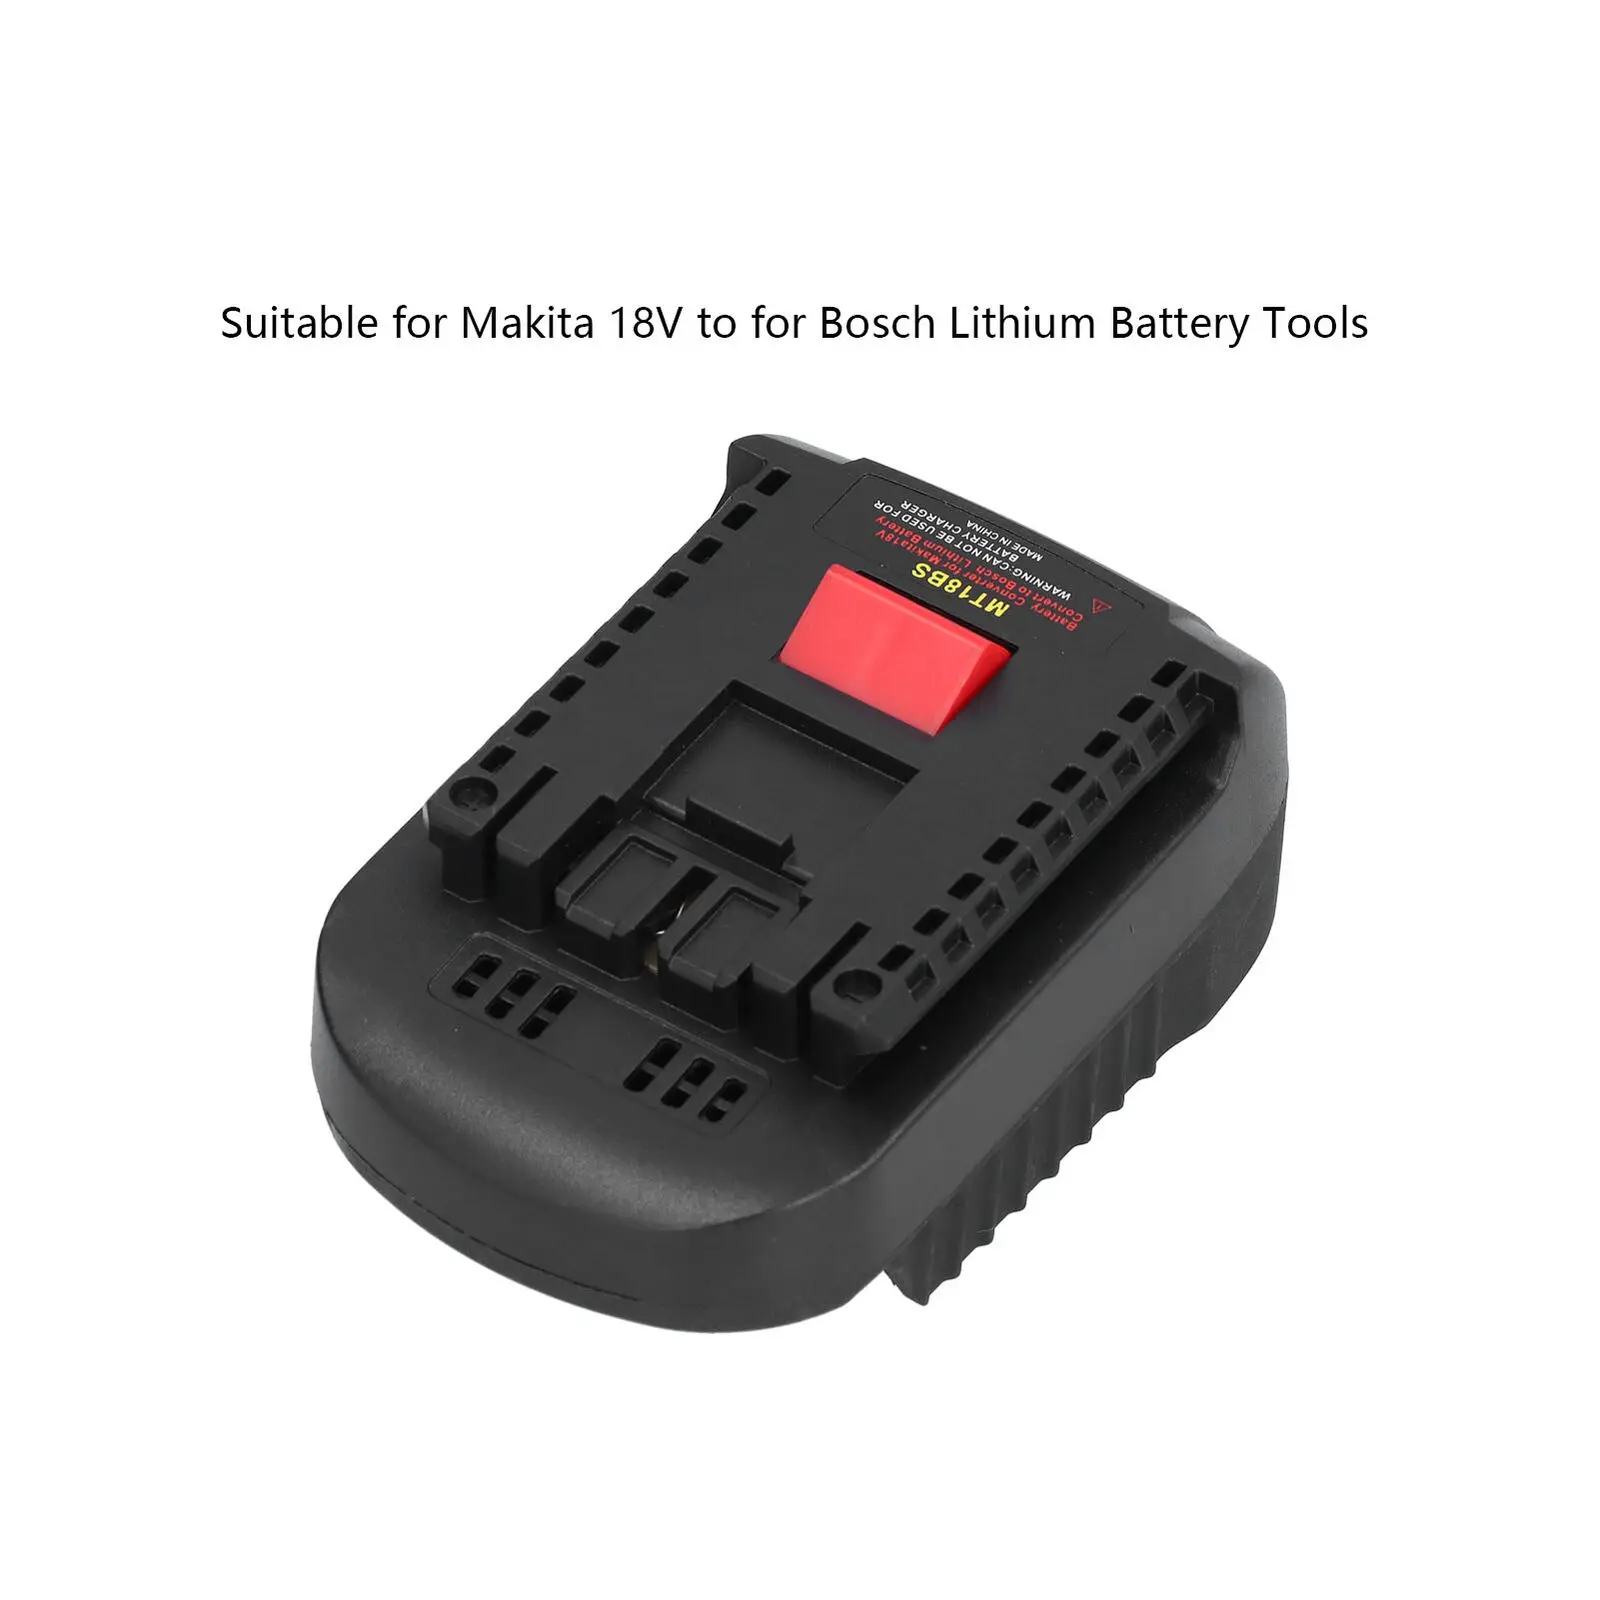 MT18BS Li-Ion Battery Converter Adapter for Makita 18V BL1830 BL1860 BL1850 BL1840 BL1820 Li-ion Battery To Bosch 18V Tool